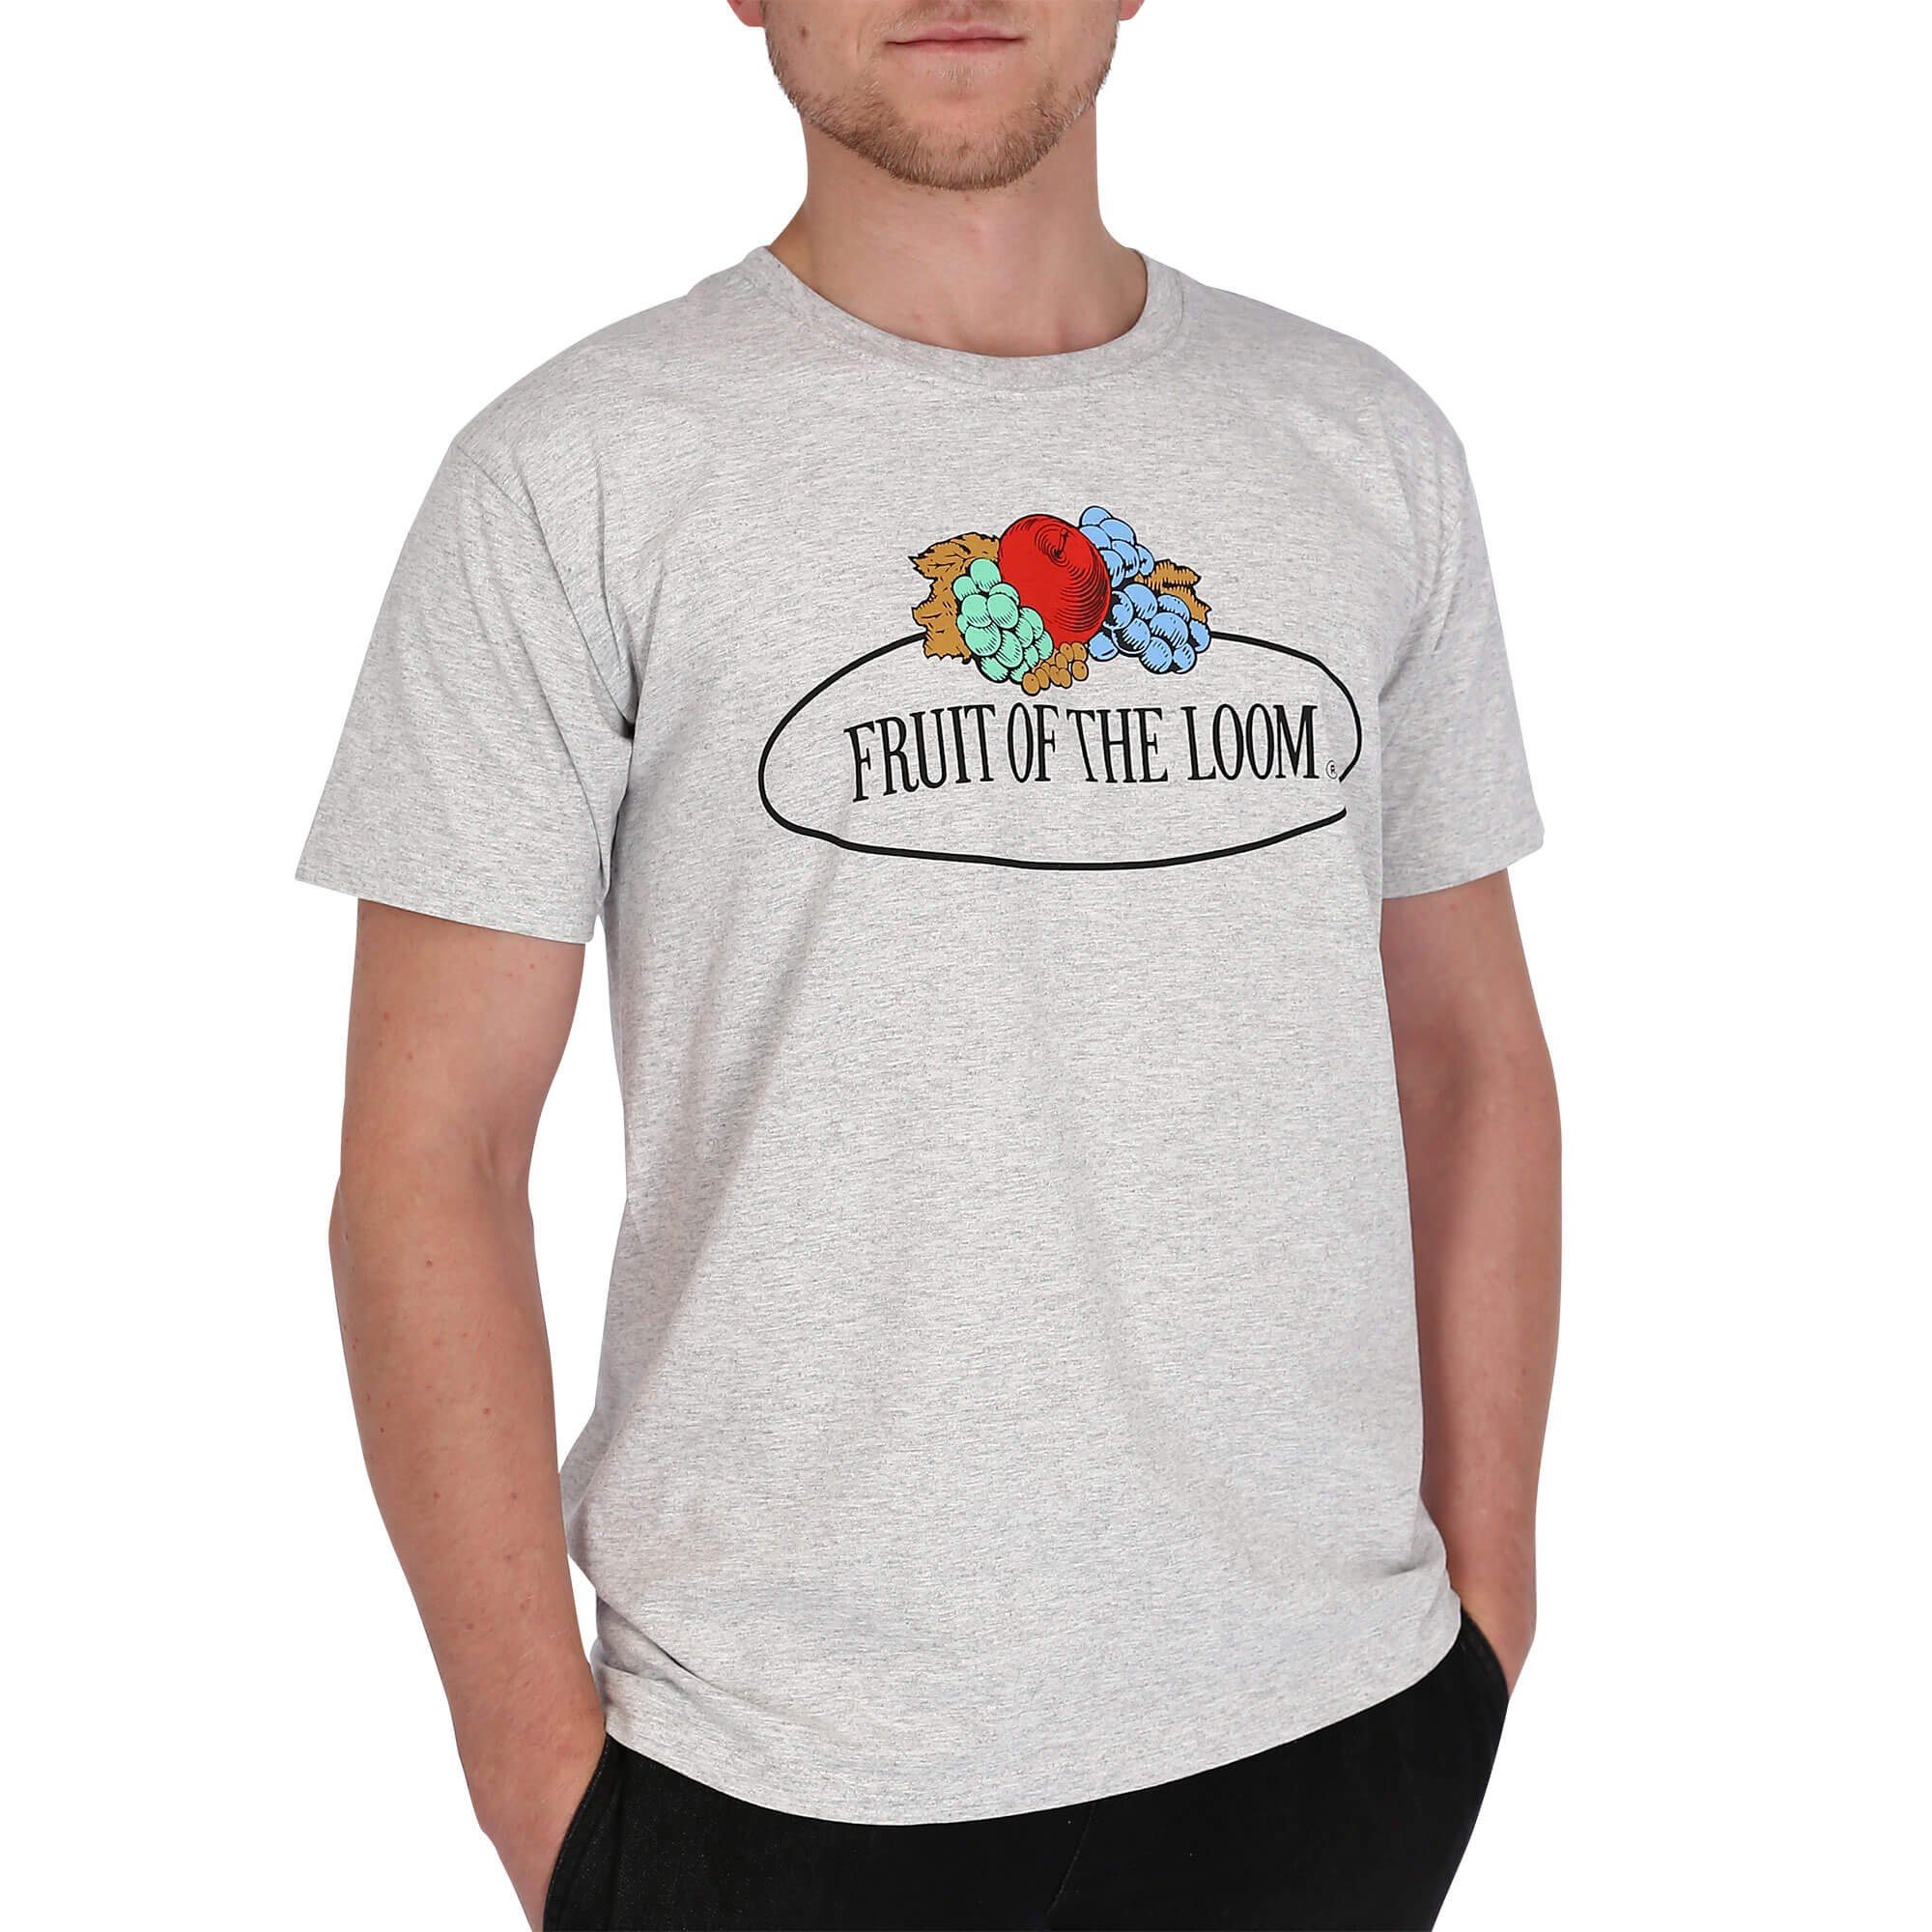 Fruit of the Loom Rundhalsshirt Fruit of the Loom Fruit of the Loom T-Shirt mit Vintage Logo graumeliert